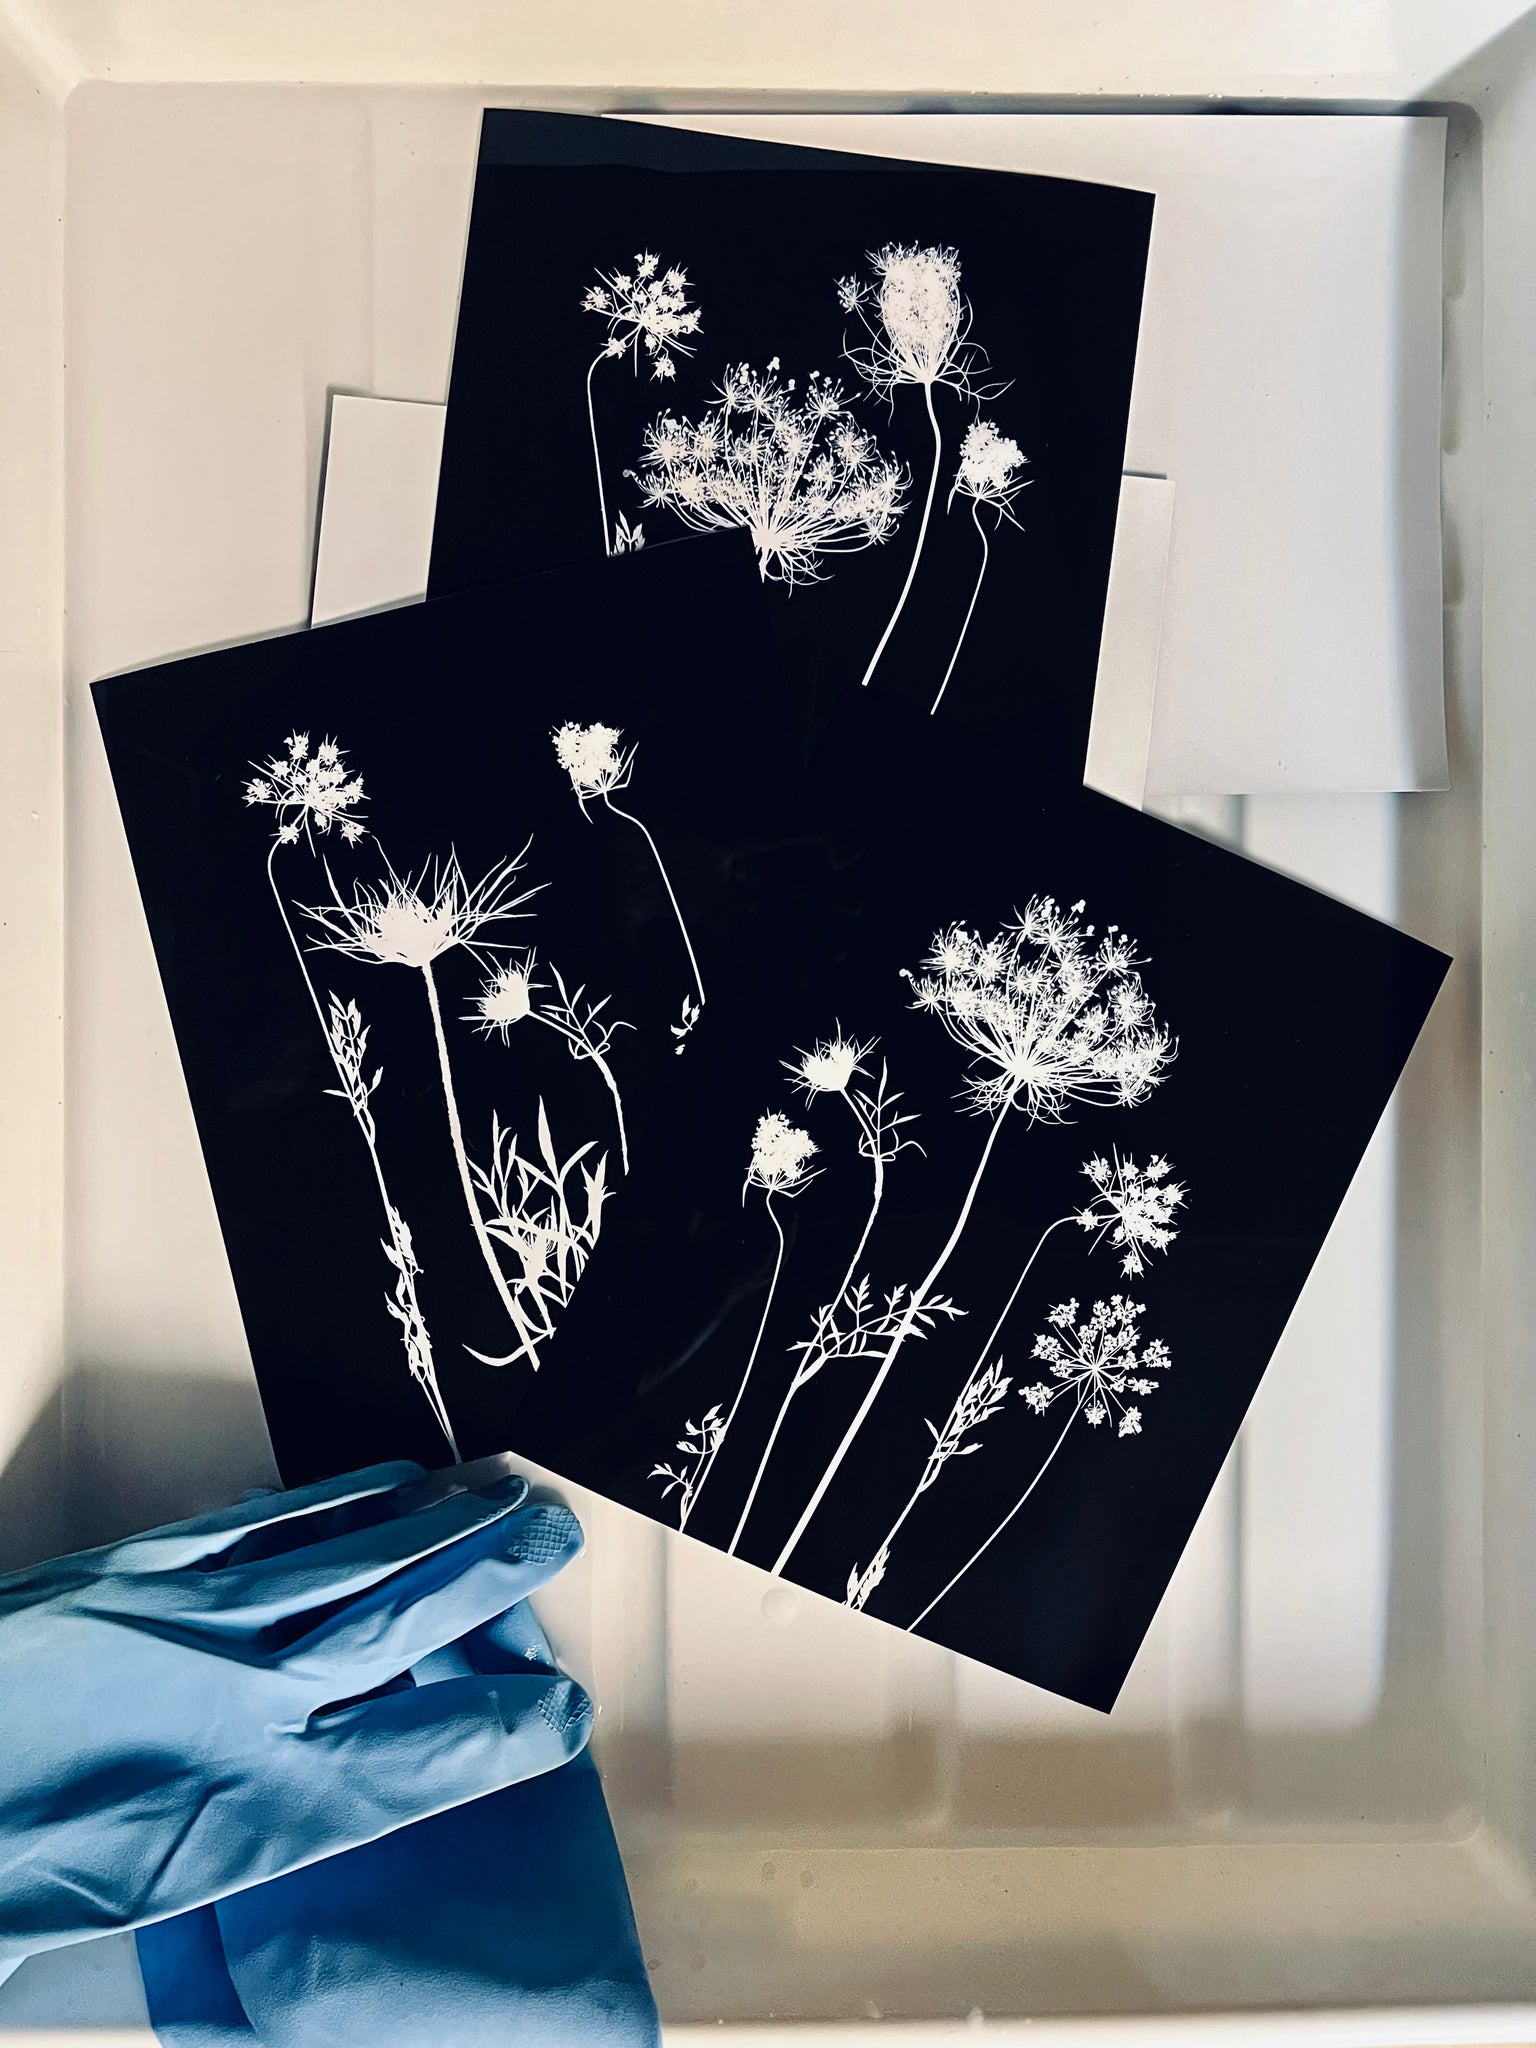 Black and white photographic prints in a darkroom wash tray with blue rubber gloves